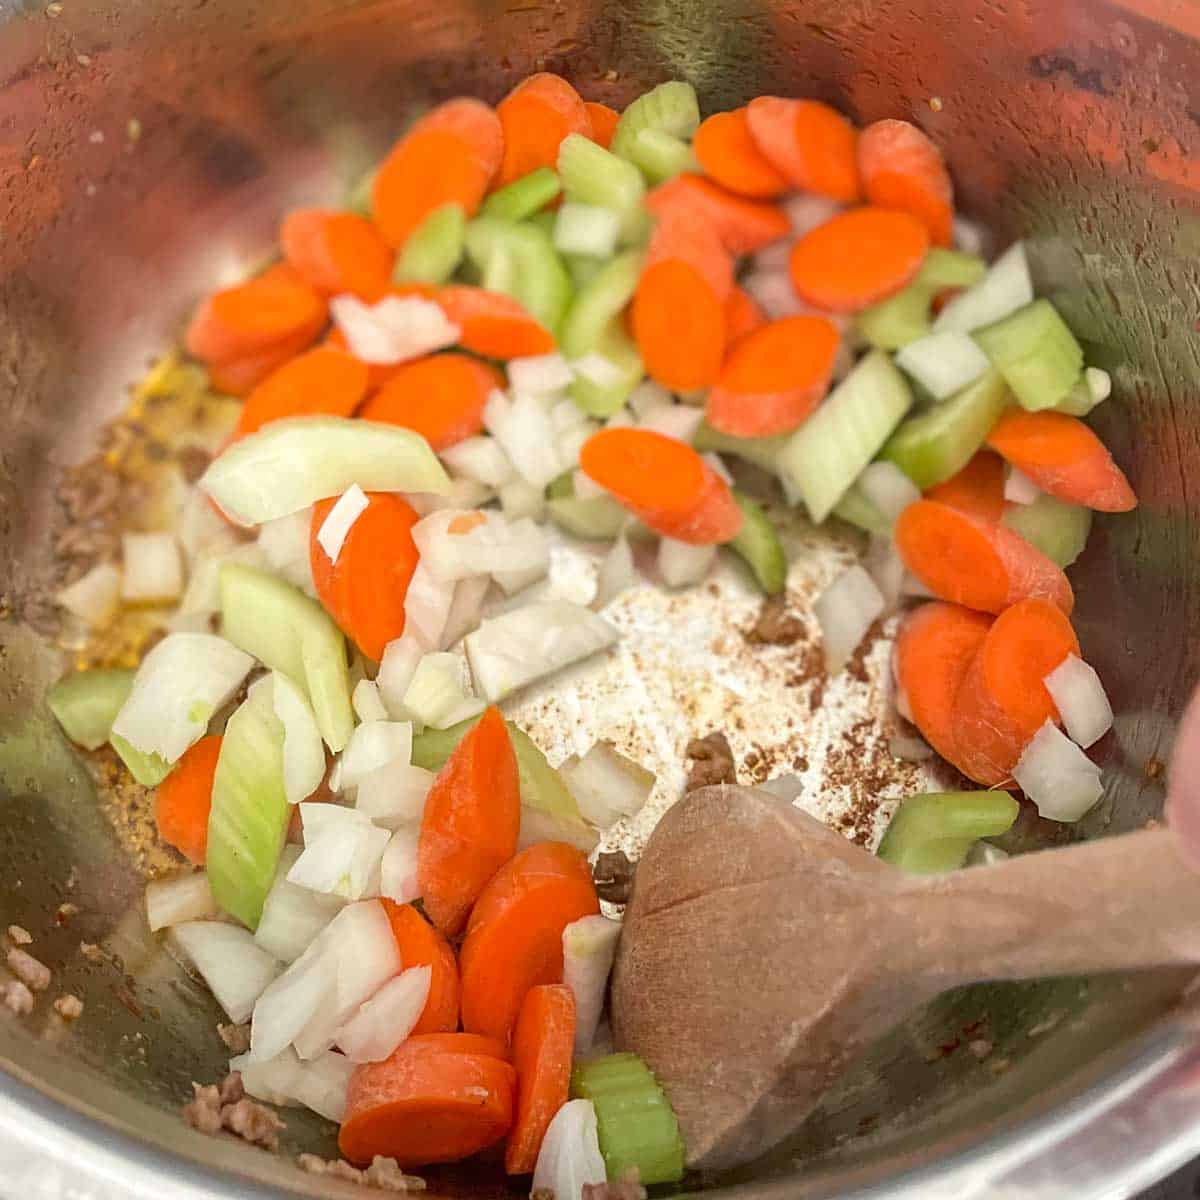 Carrot, celery, and onion are stirred in the Instant Pot.